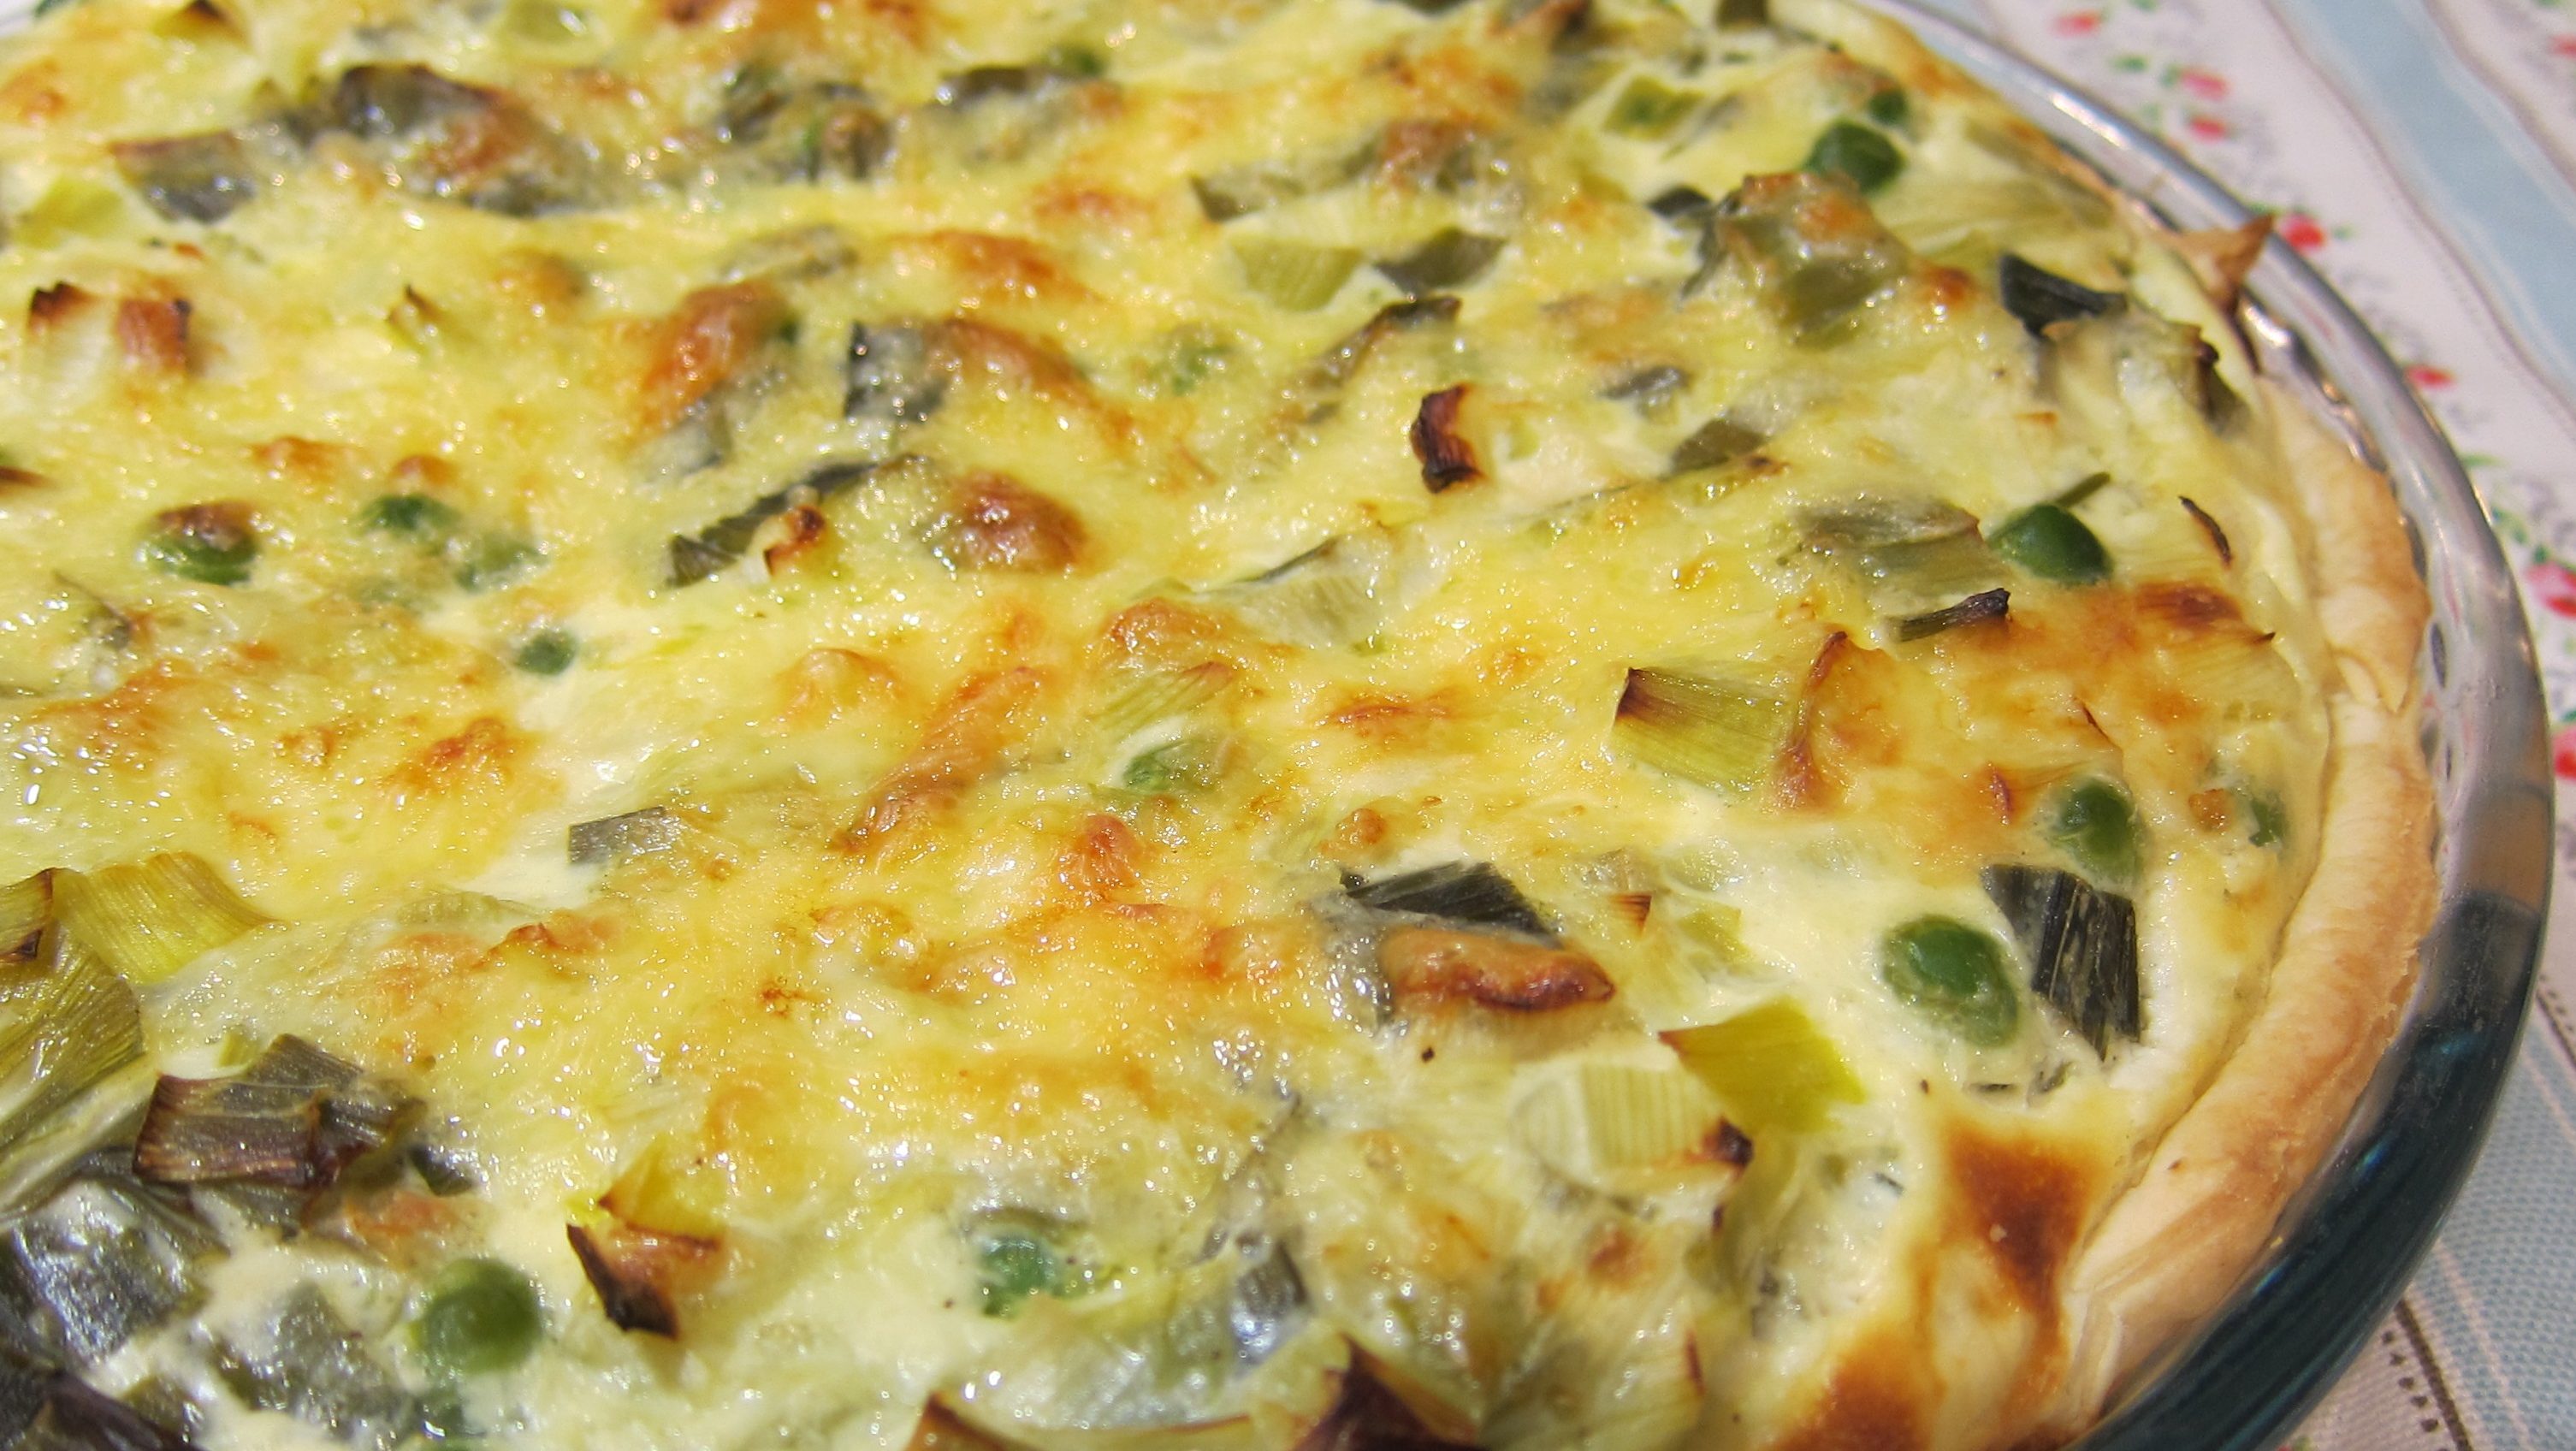 A round quiche with green vegetables bits showing.